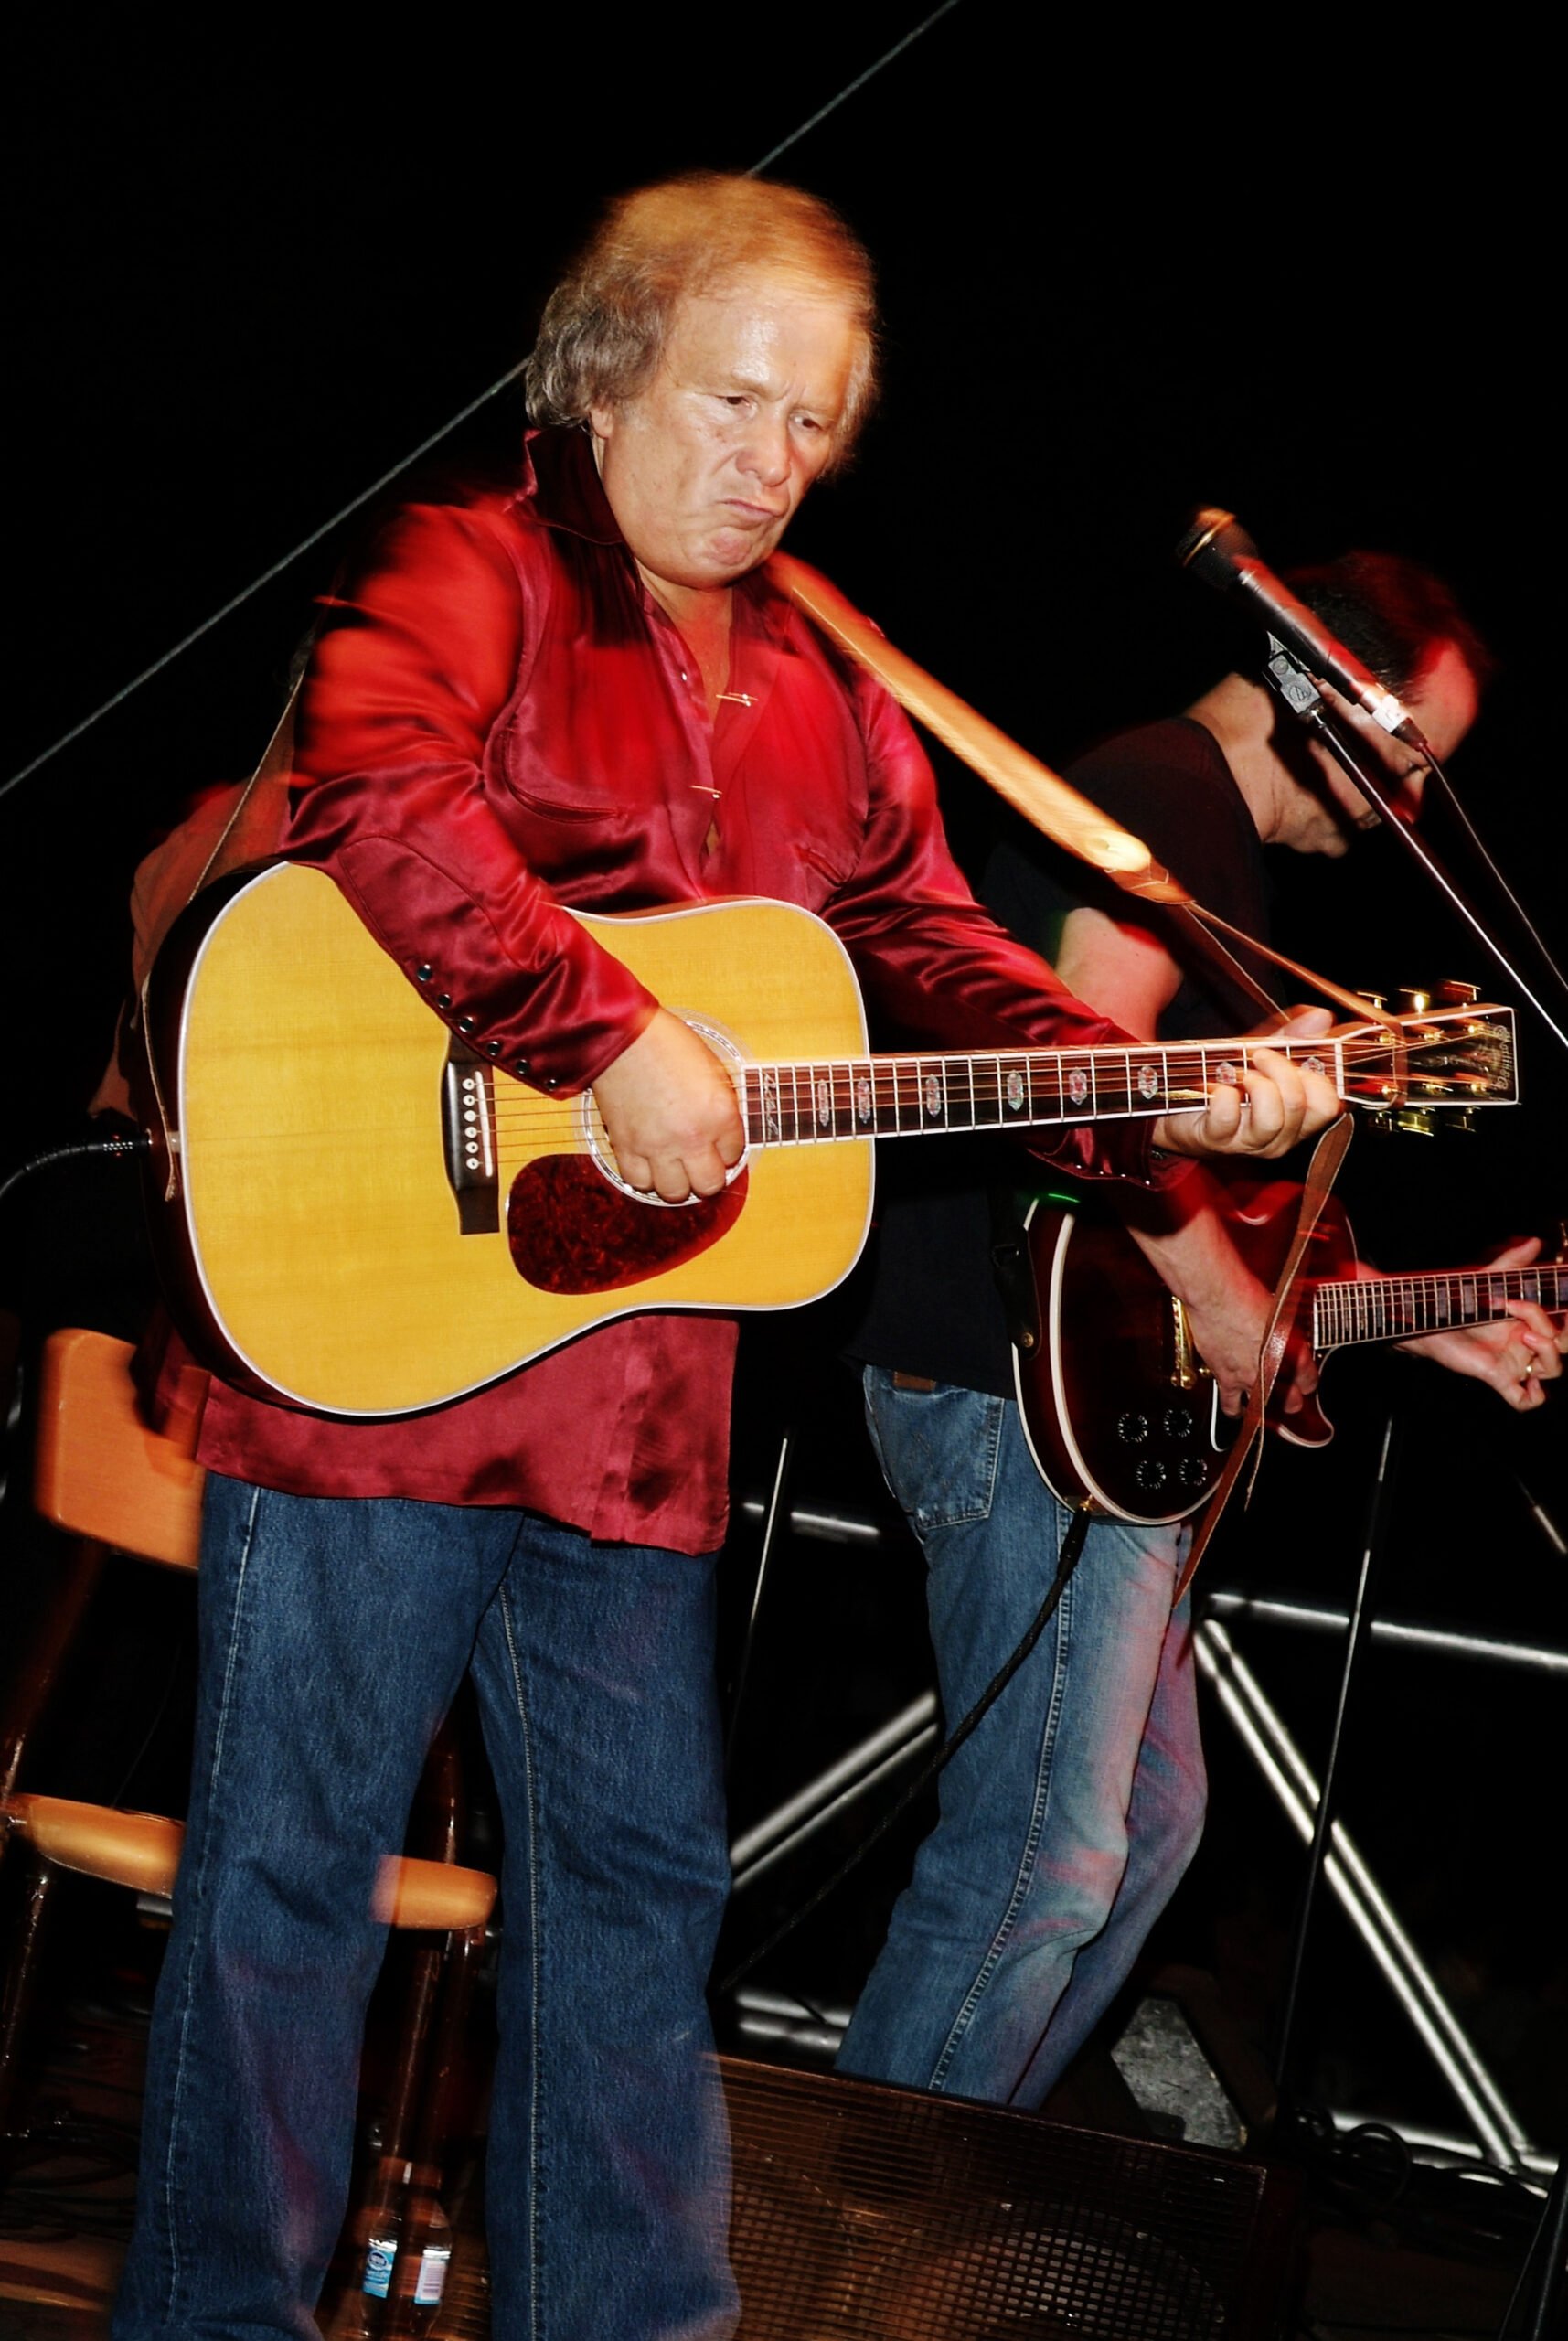 'American Pie' Singer Don McLean Has Some Harsh Words For His Ex-Wife Patrisha